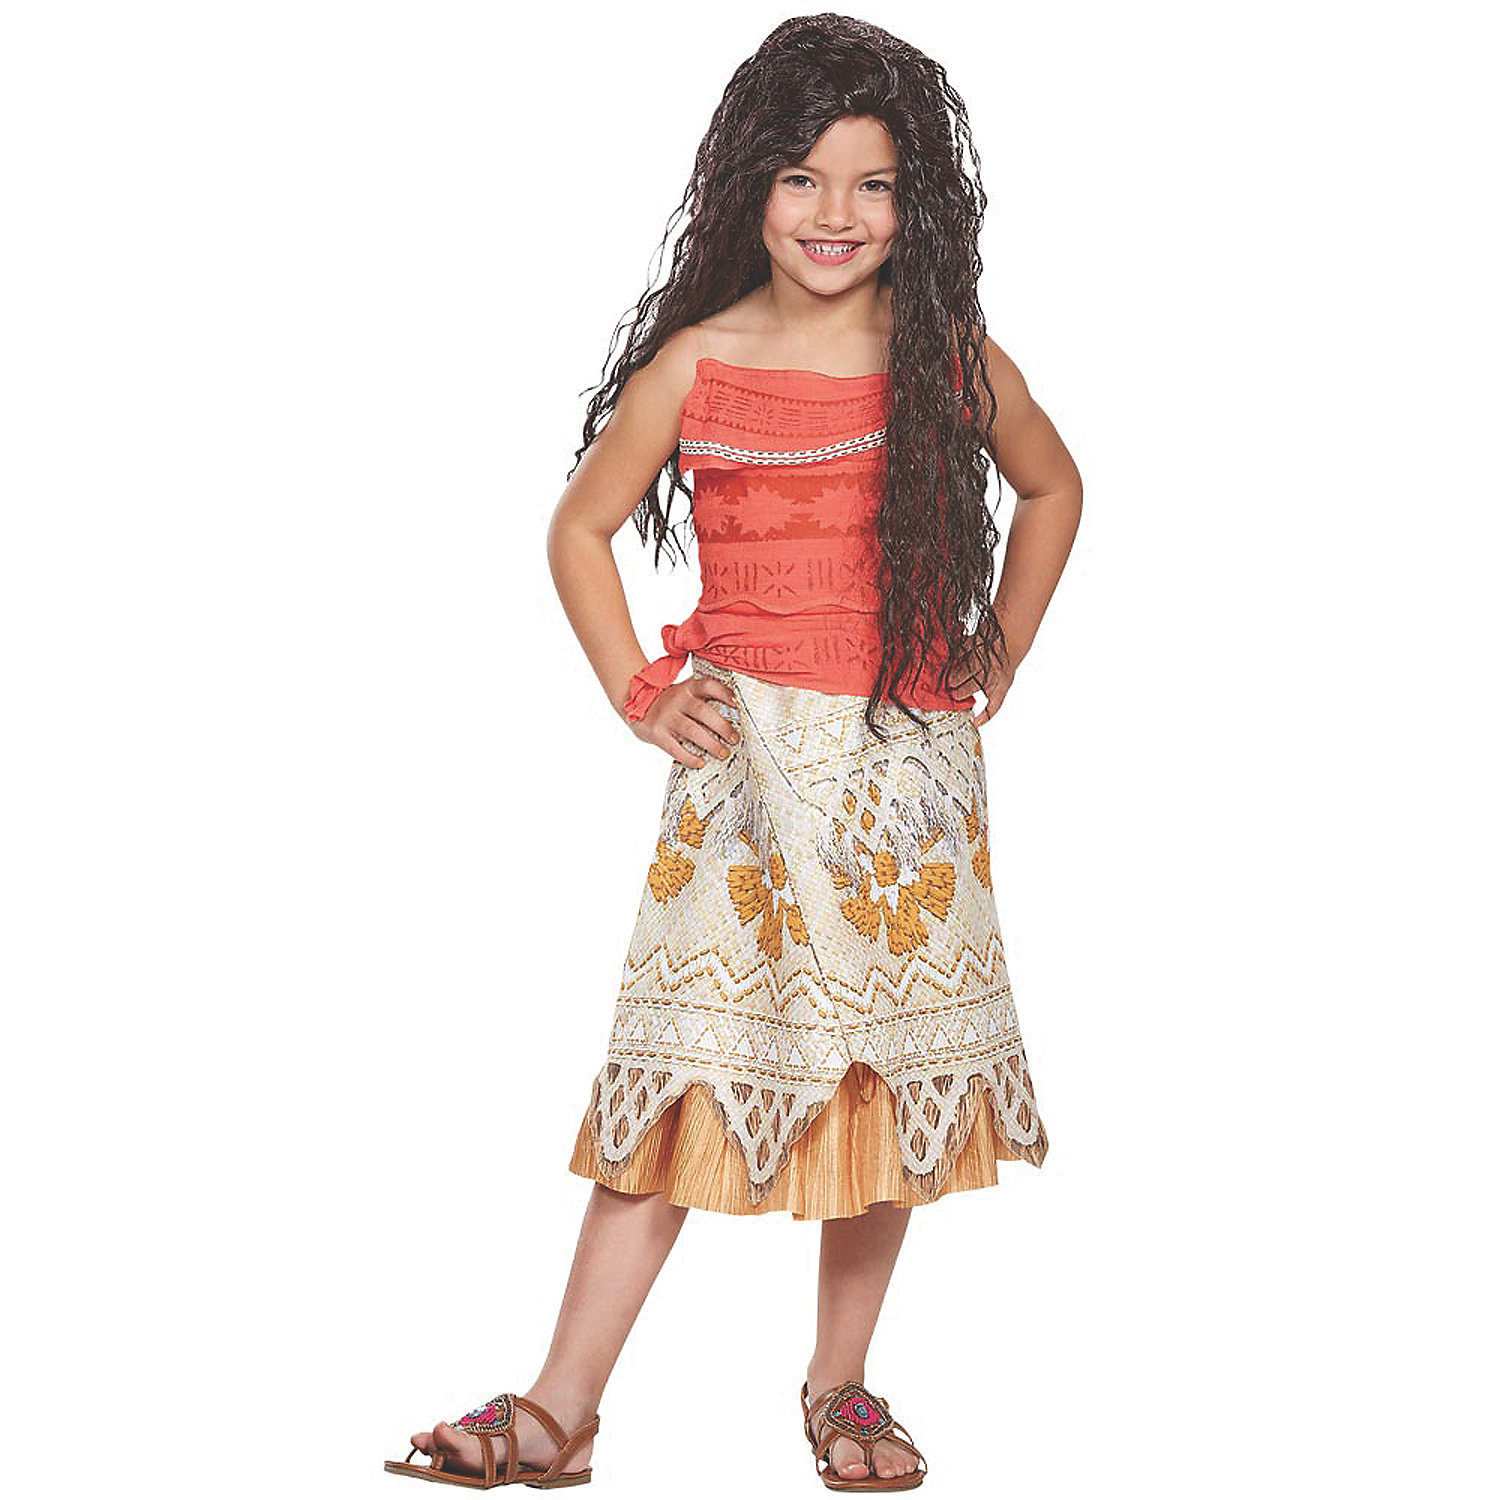 Disguise Girls' Moana Classic Costume - 4-6X - image 1 of 3